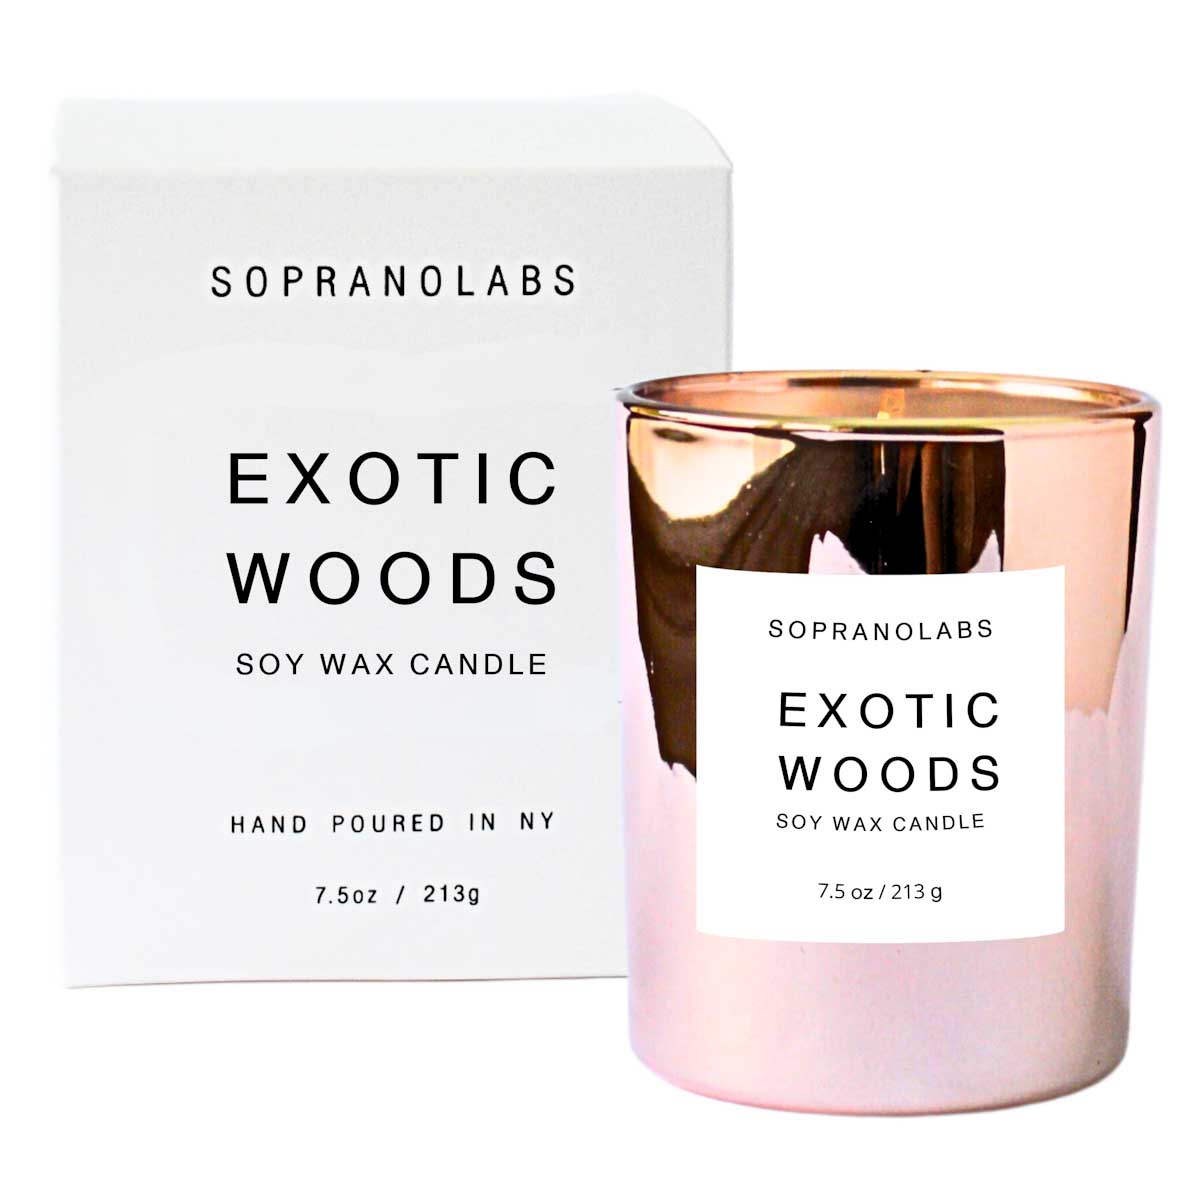 EXOTIC WOODS Soy Wax Candle by Sopranolabs